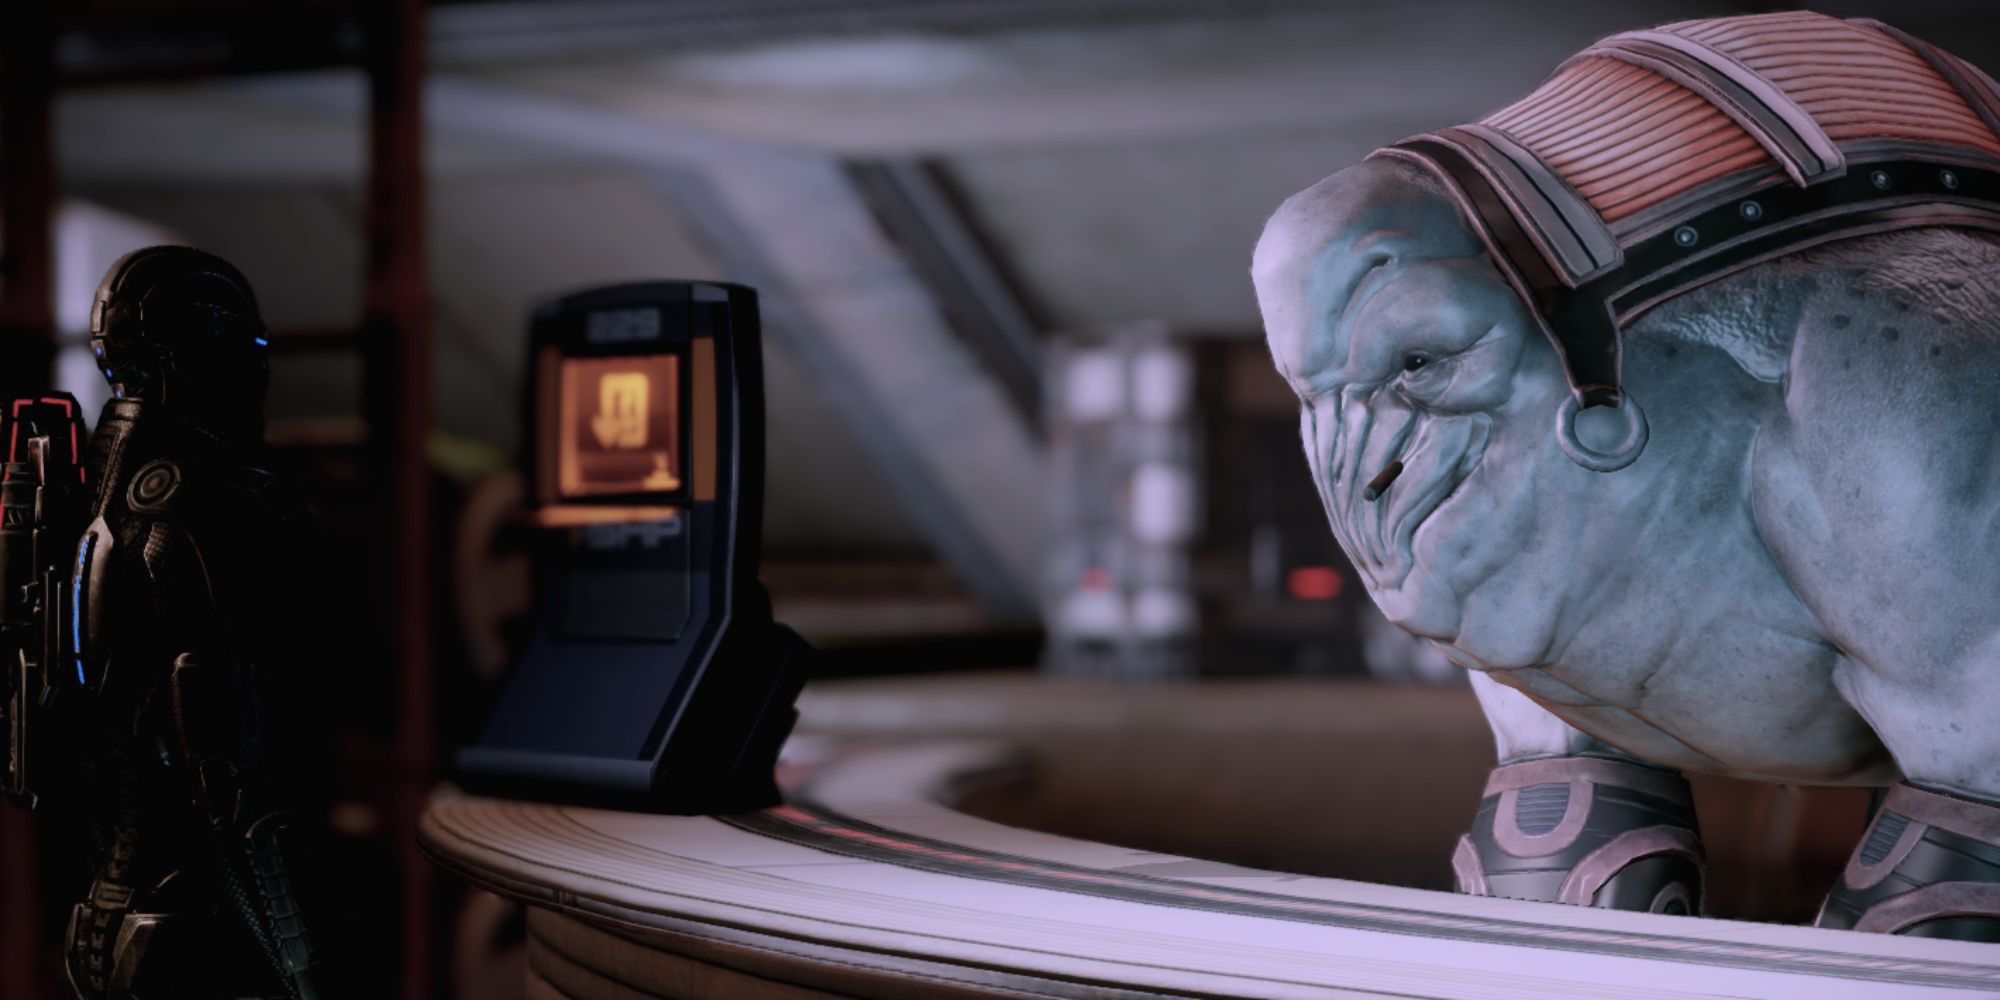 should-you-pay-kenn-or-talk-to-harrot-in-mass-effect-2